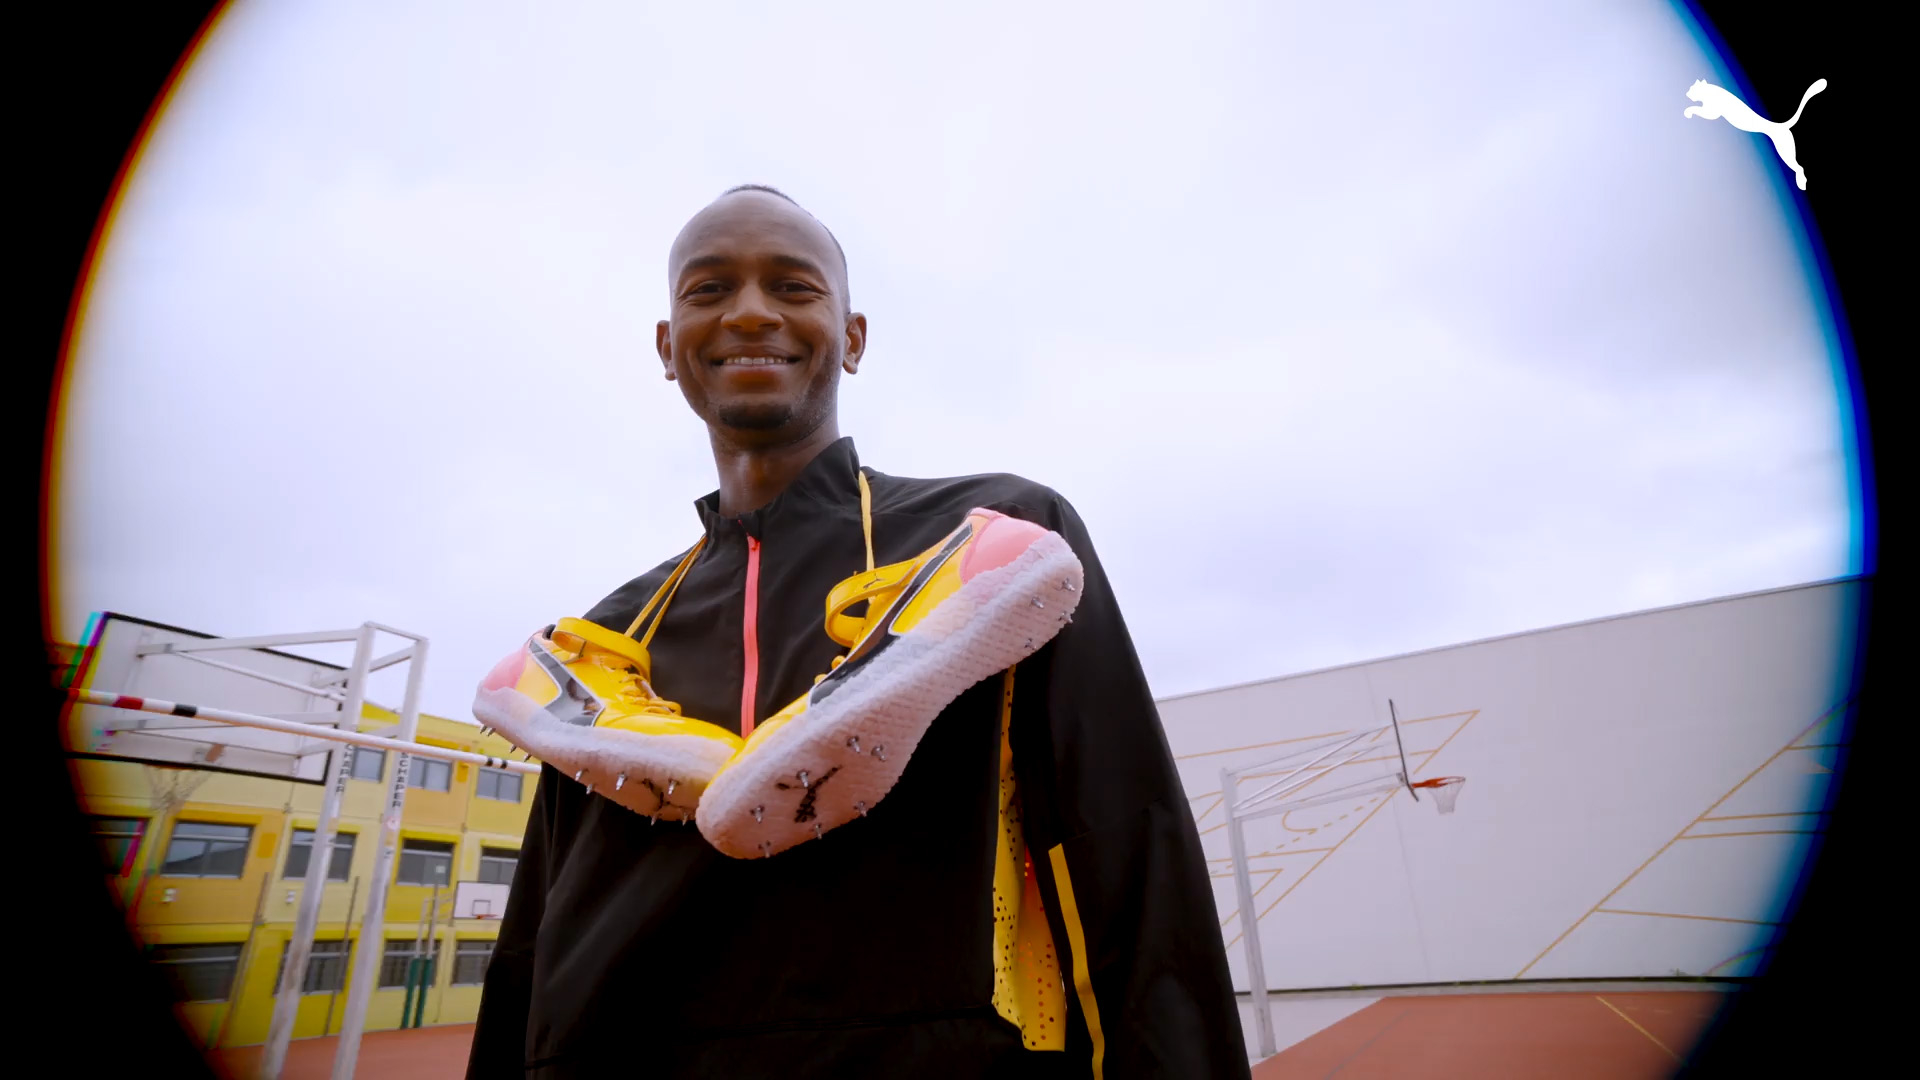 Sports company PUMA has signed Qatari athlete Mutaz Essa Barshim, one of the most successful high jumpers of all time, who will wear the company’s performance products starting at the Diamond League Meeting in Lausanne. (Photo: Business Wire)